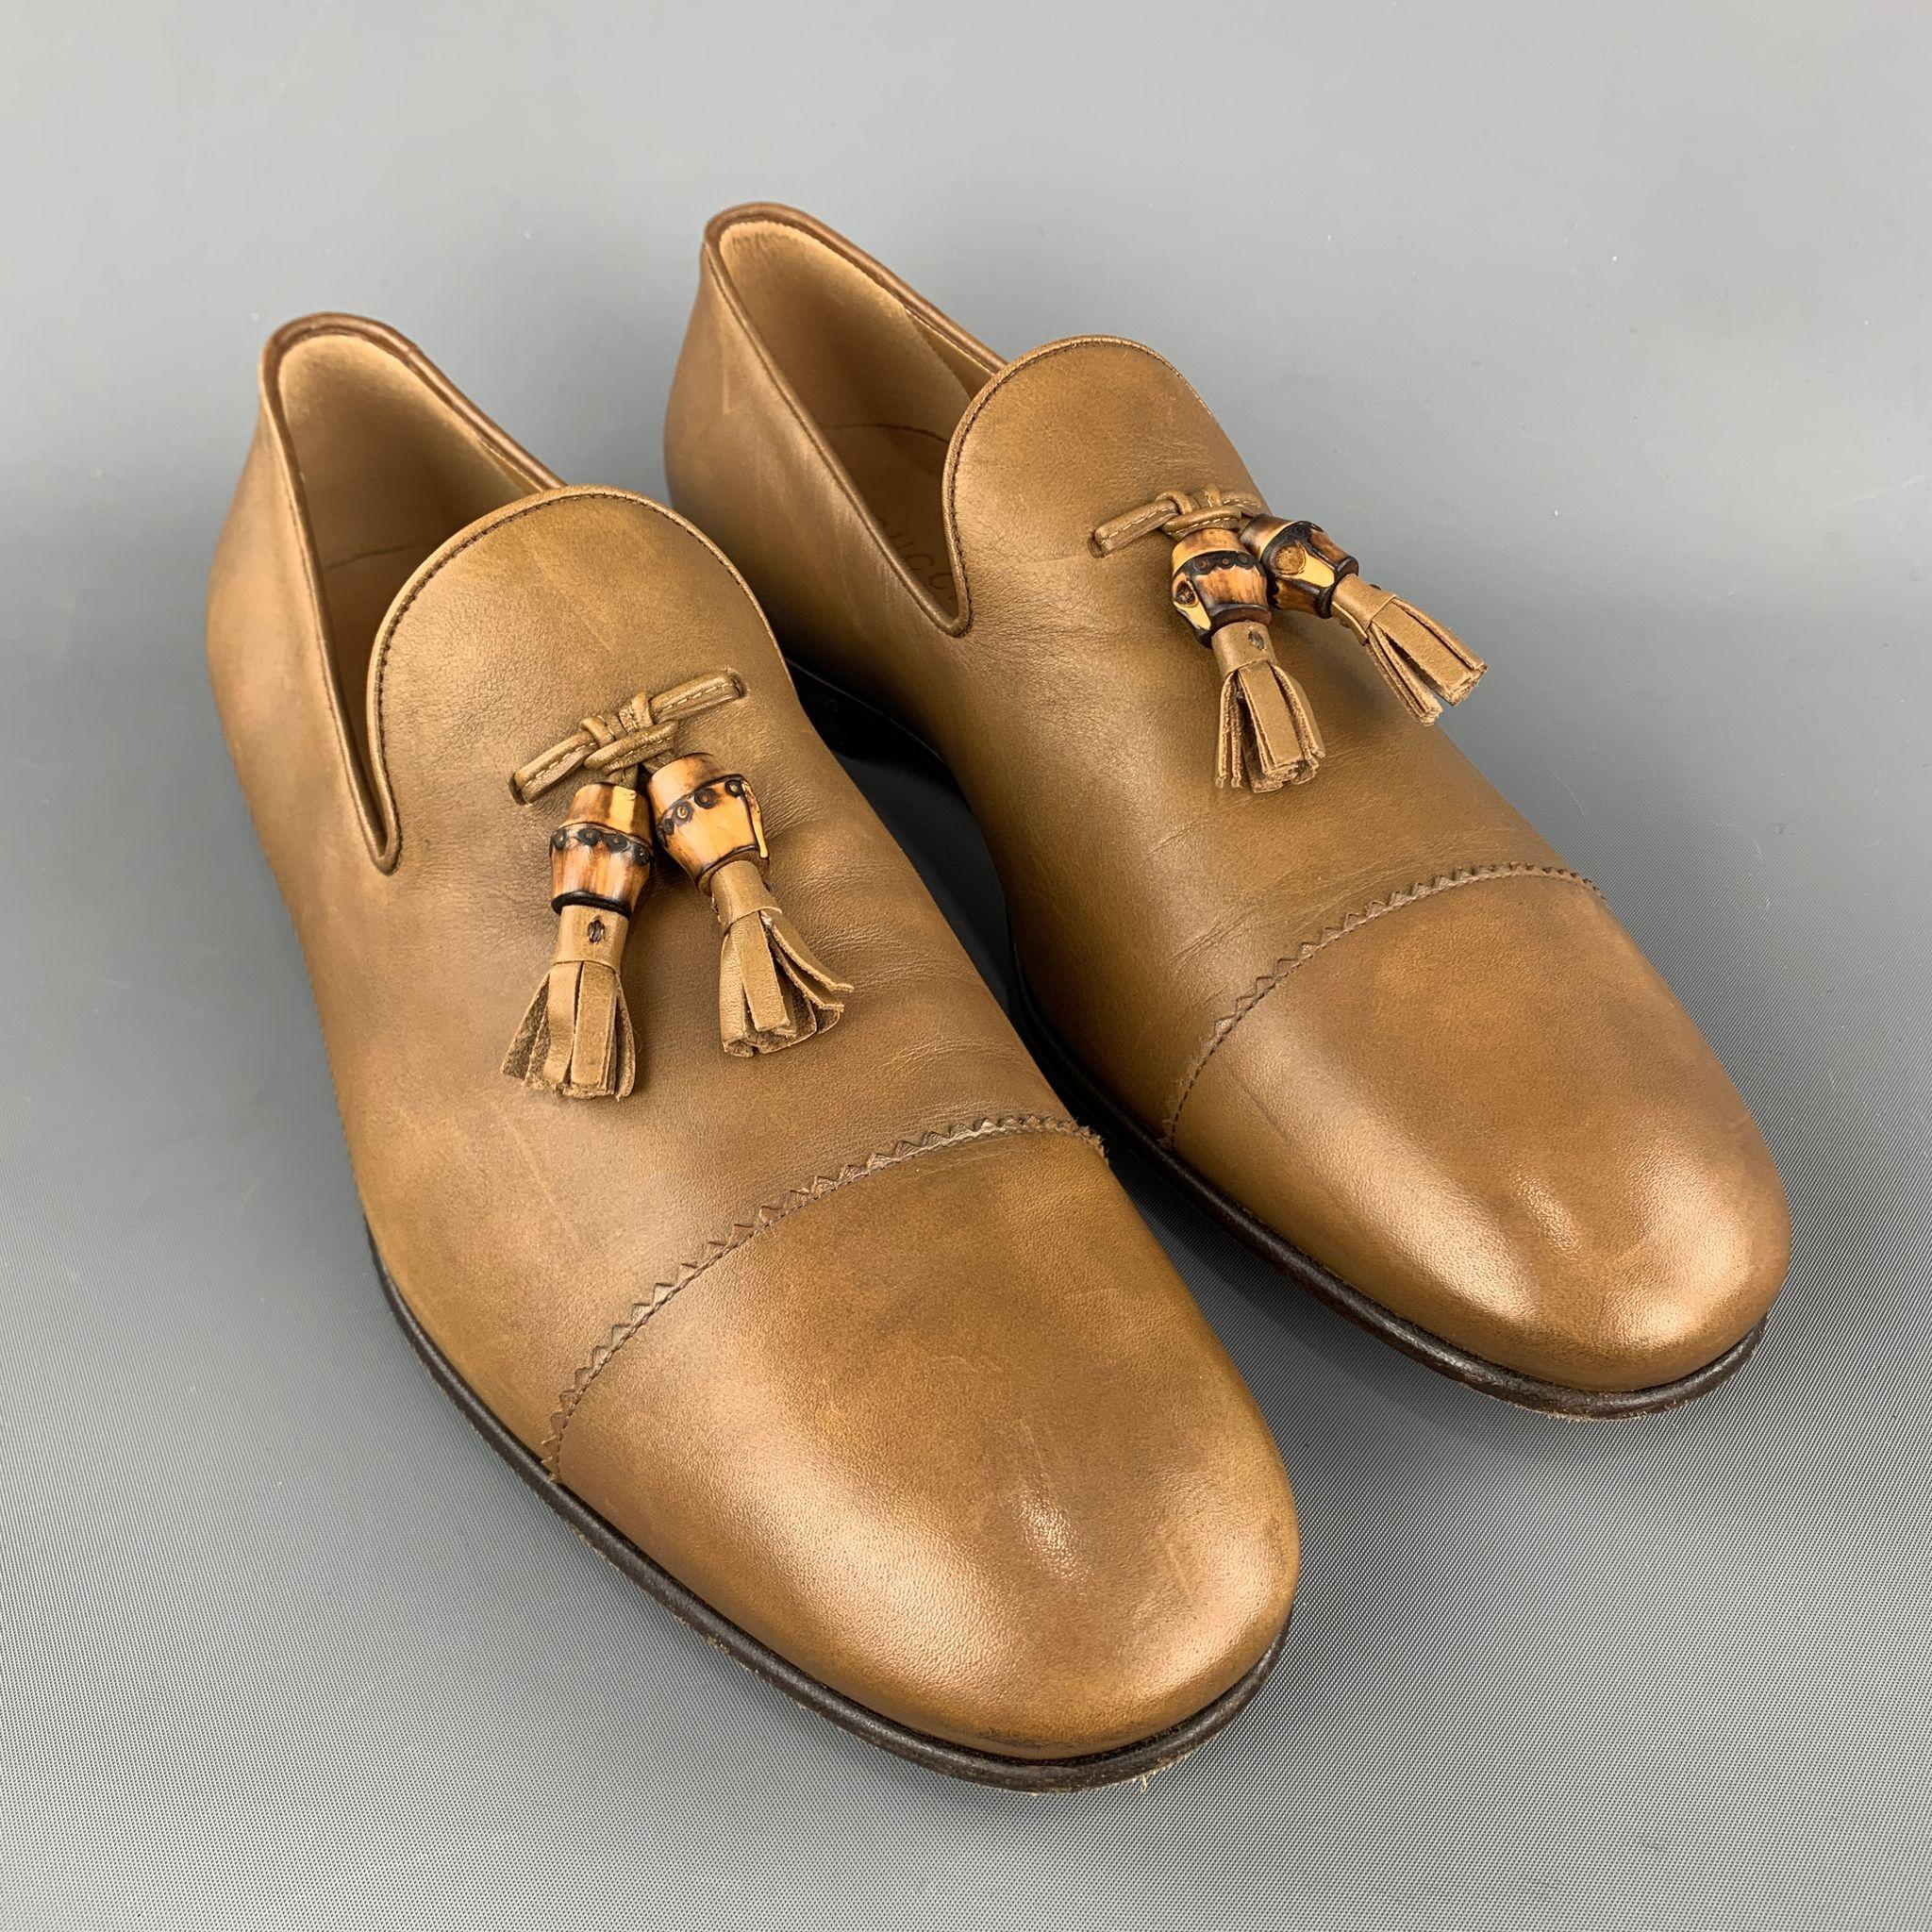 GUCCI loafers comes in a tan leather featuring a slip on style, front tassel details, and wooden sole. Made in Italy.

 

Excellent Pre-Owned Condition.
Marked: 10

Outsole: 4 in. x 12 in. 